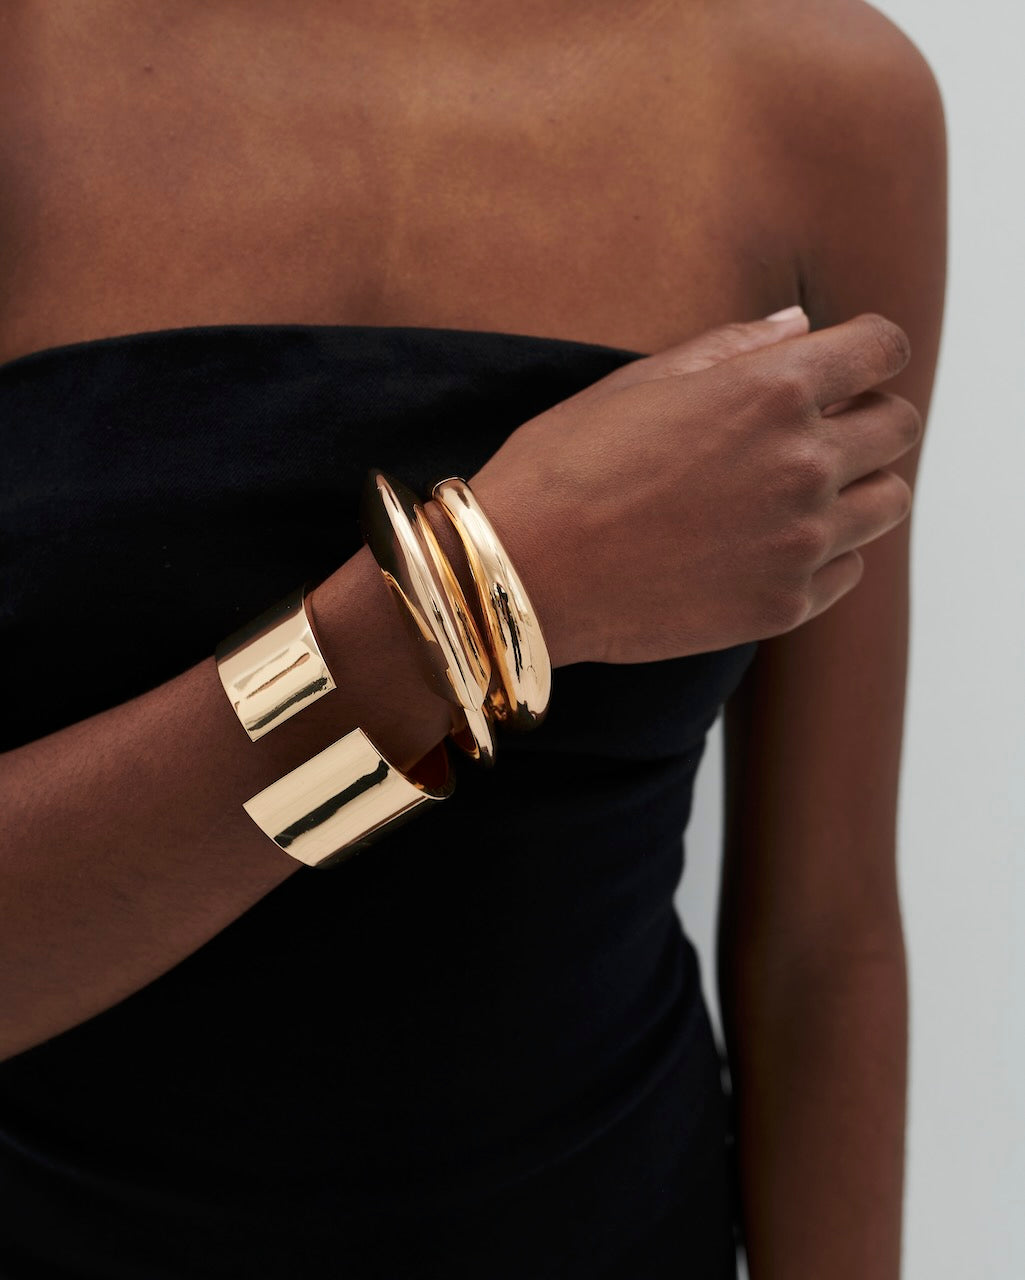 Anna Rossi Asymmetrical Cuff in Gold available at TNT The New Trend Australia